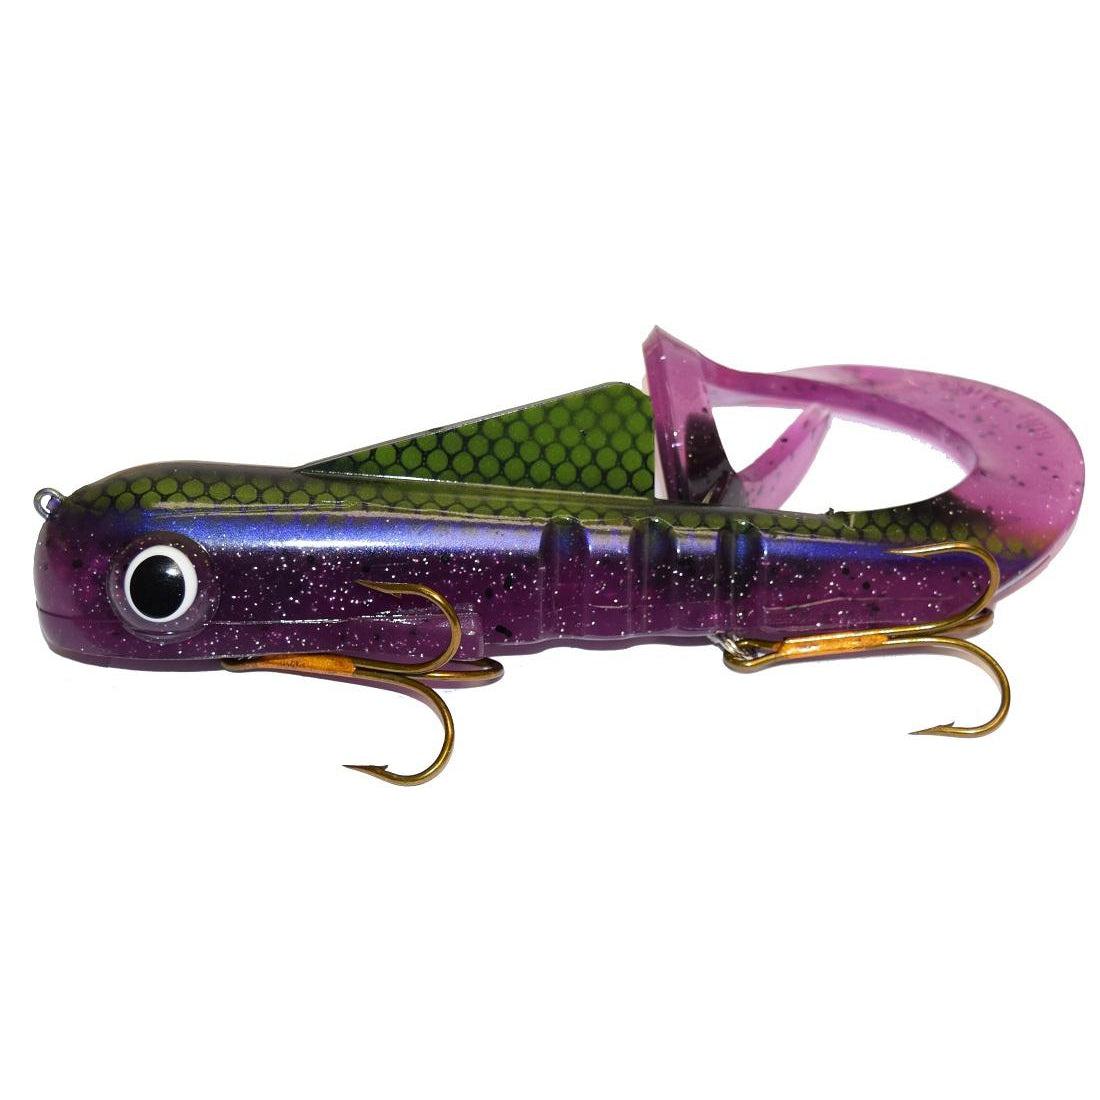 View of Rubber Musky Innovations Pro Regular Dawg Purple Shad available at EZOKO Pike and Musky Shop